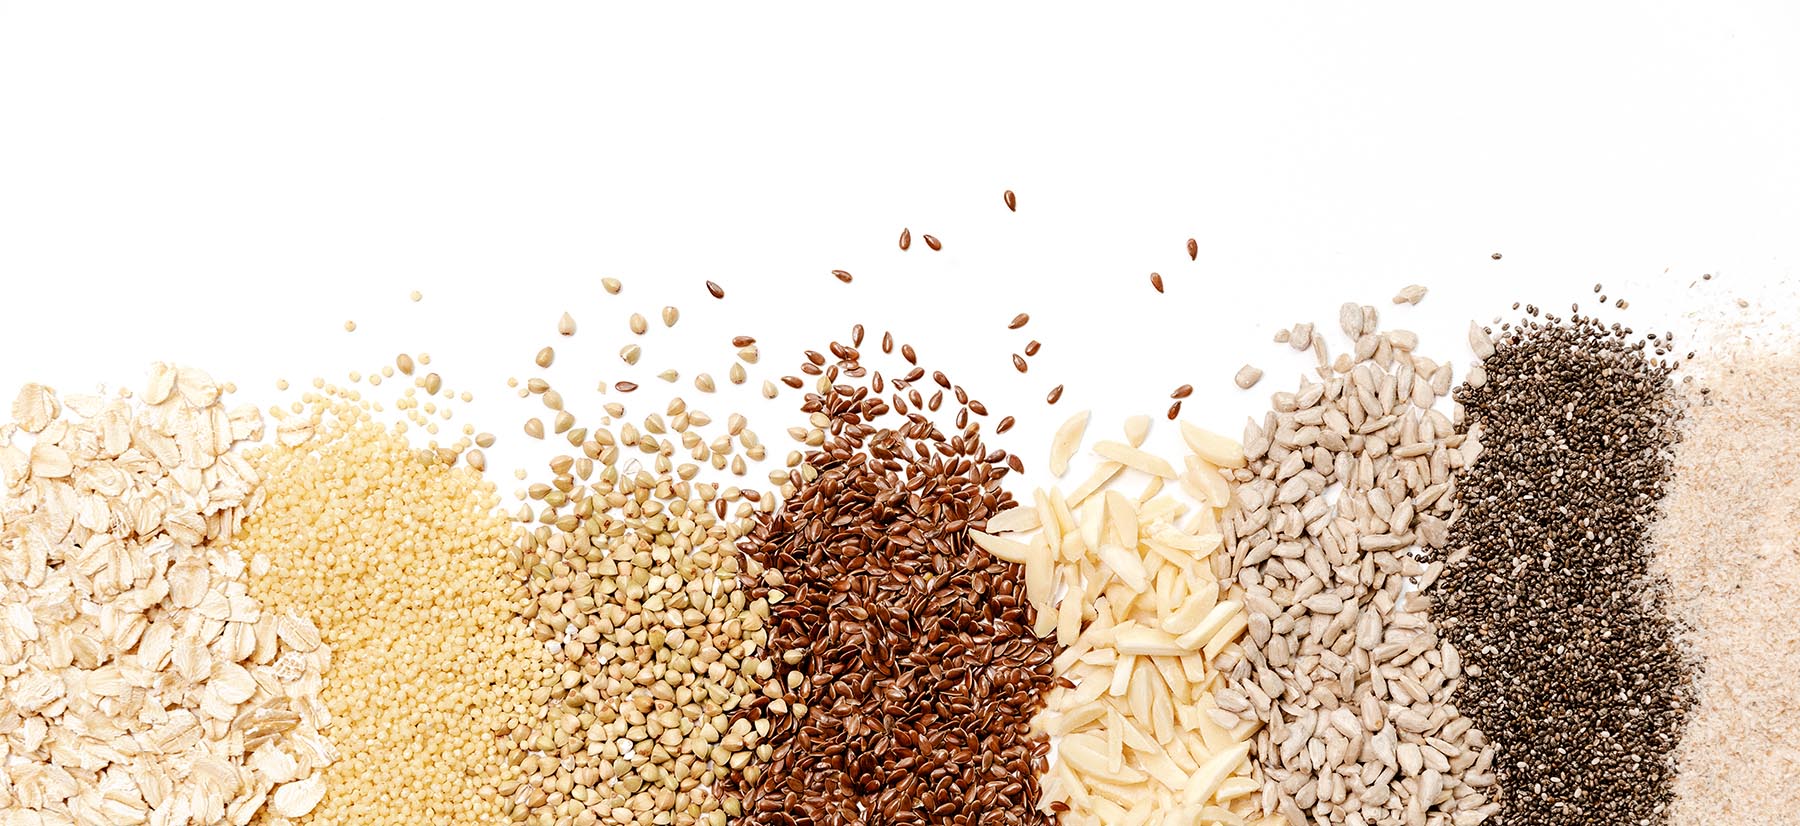 Oats, millet, buckwheat, flaxseed, sliced almonds, sunflower seeds, chia seeds & psyllium husk spread in columns next to each other on a white background.